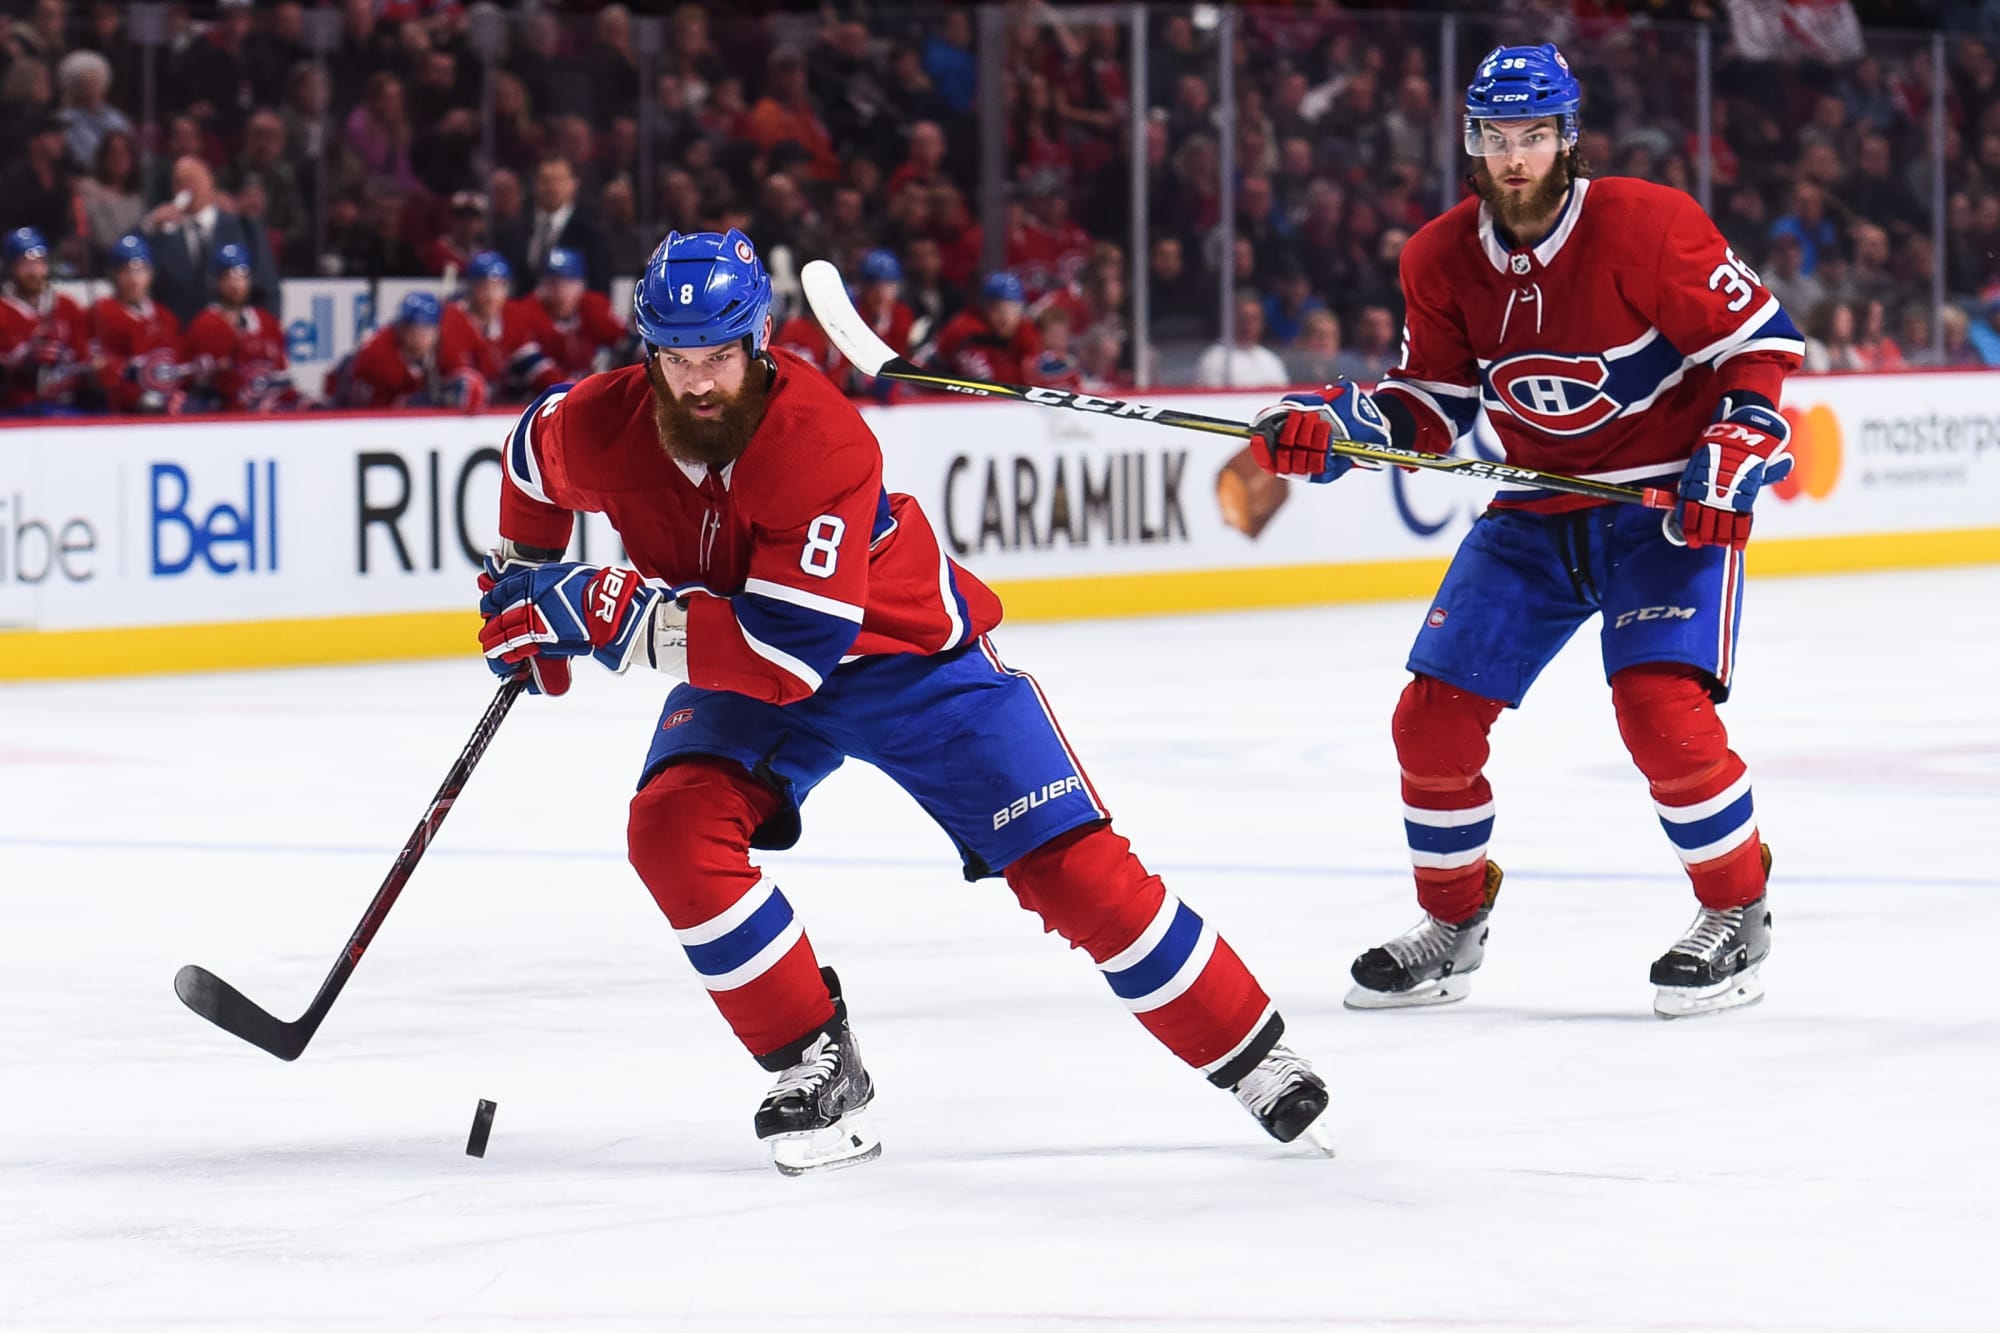 Montreal Canadiens Contract situation provides another reason for a trade